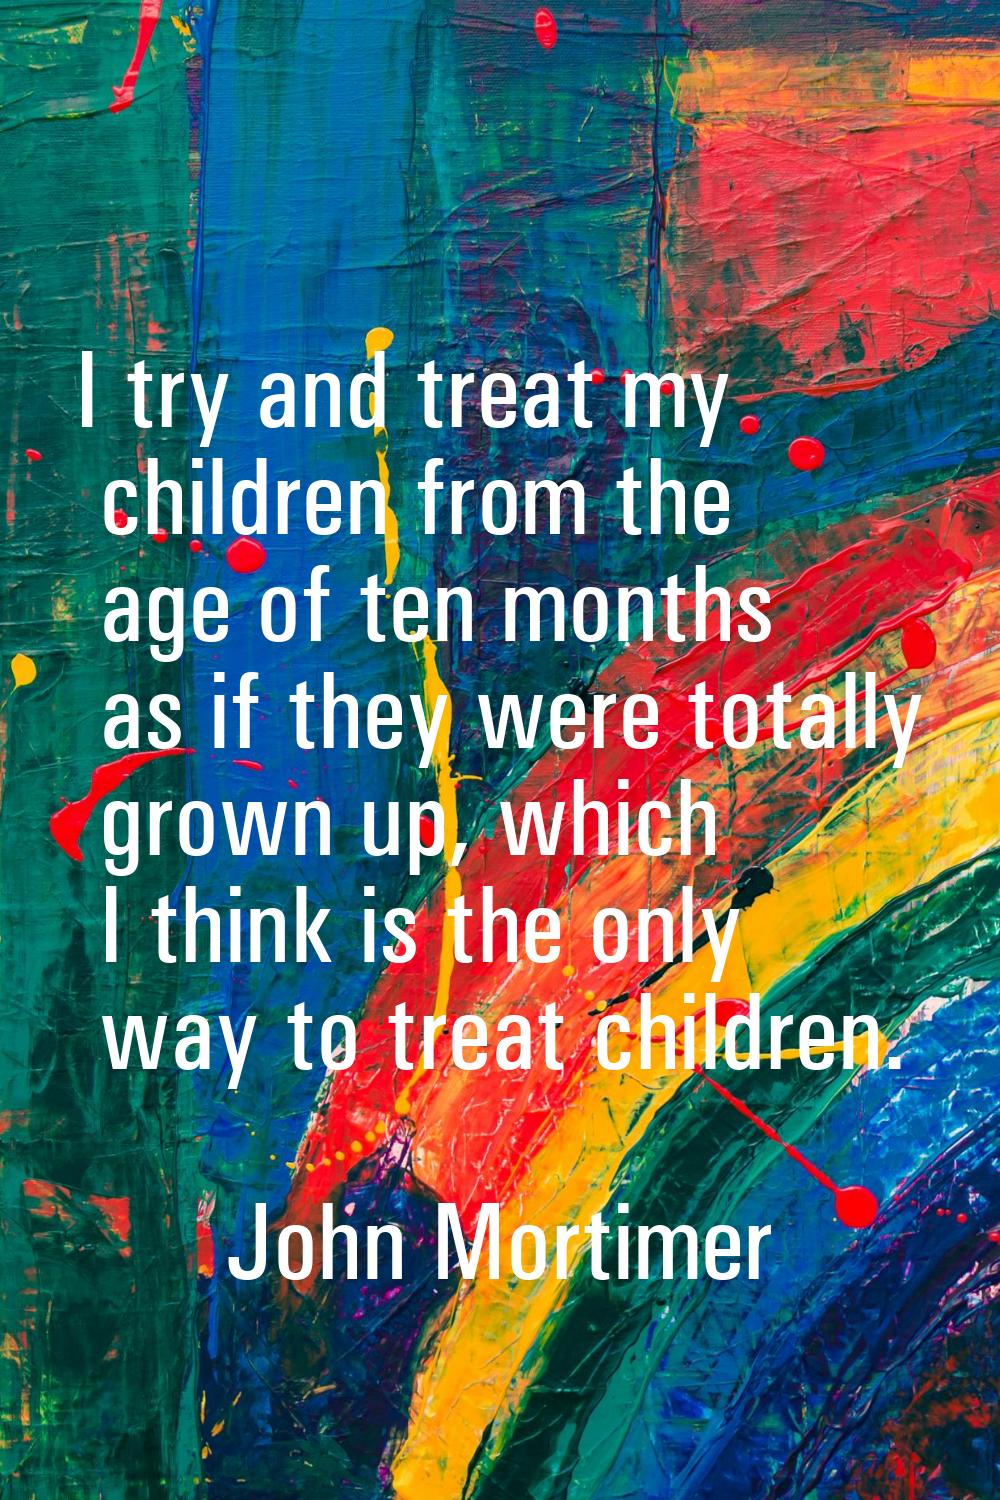 I try and treat my children from the age of ten months as if they were totally grown up, which I th